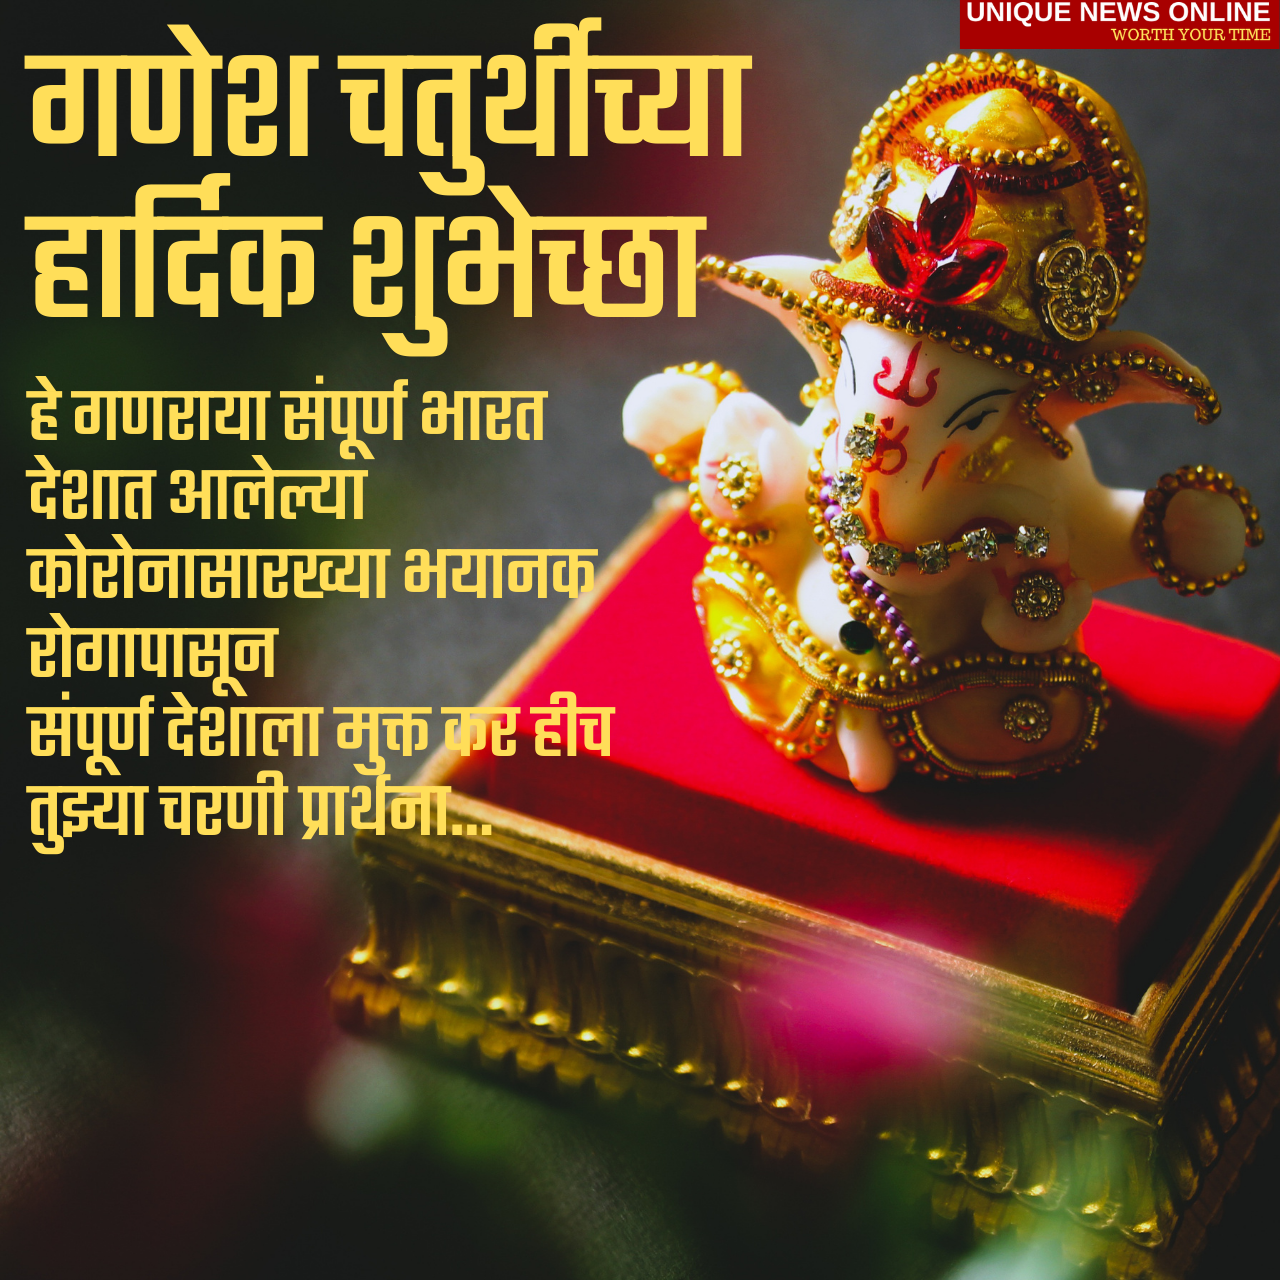 Happy Vinayak Chaturthi 2021 Wishes in Marathi, Messages, Greetings, Quotes, and Images in Marathi